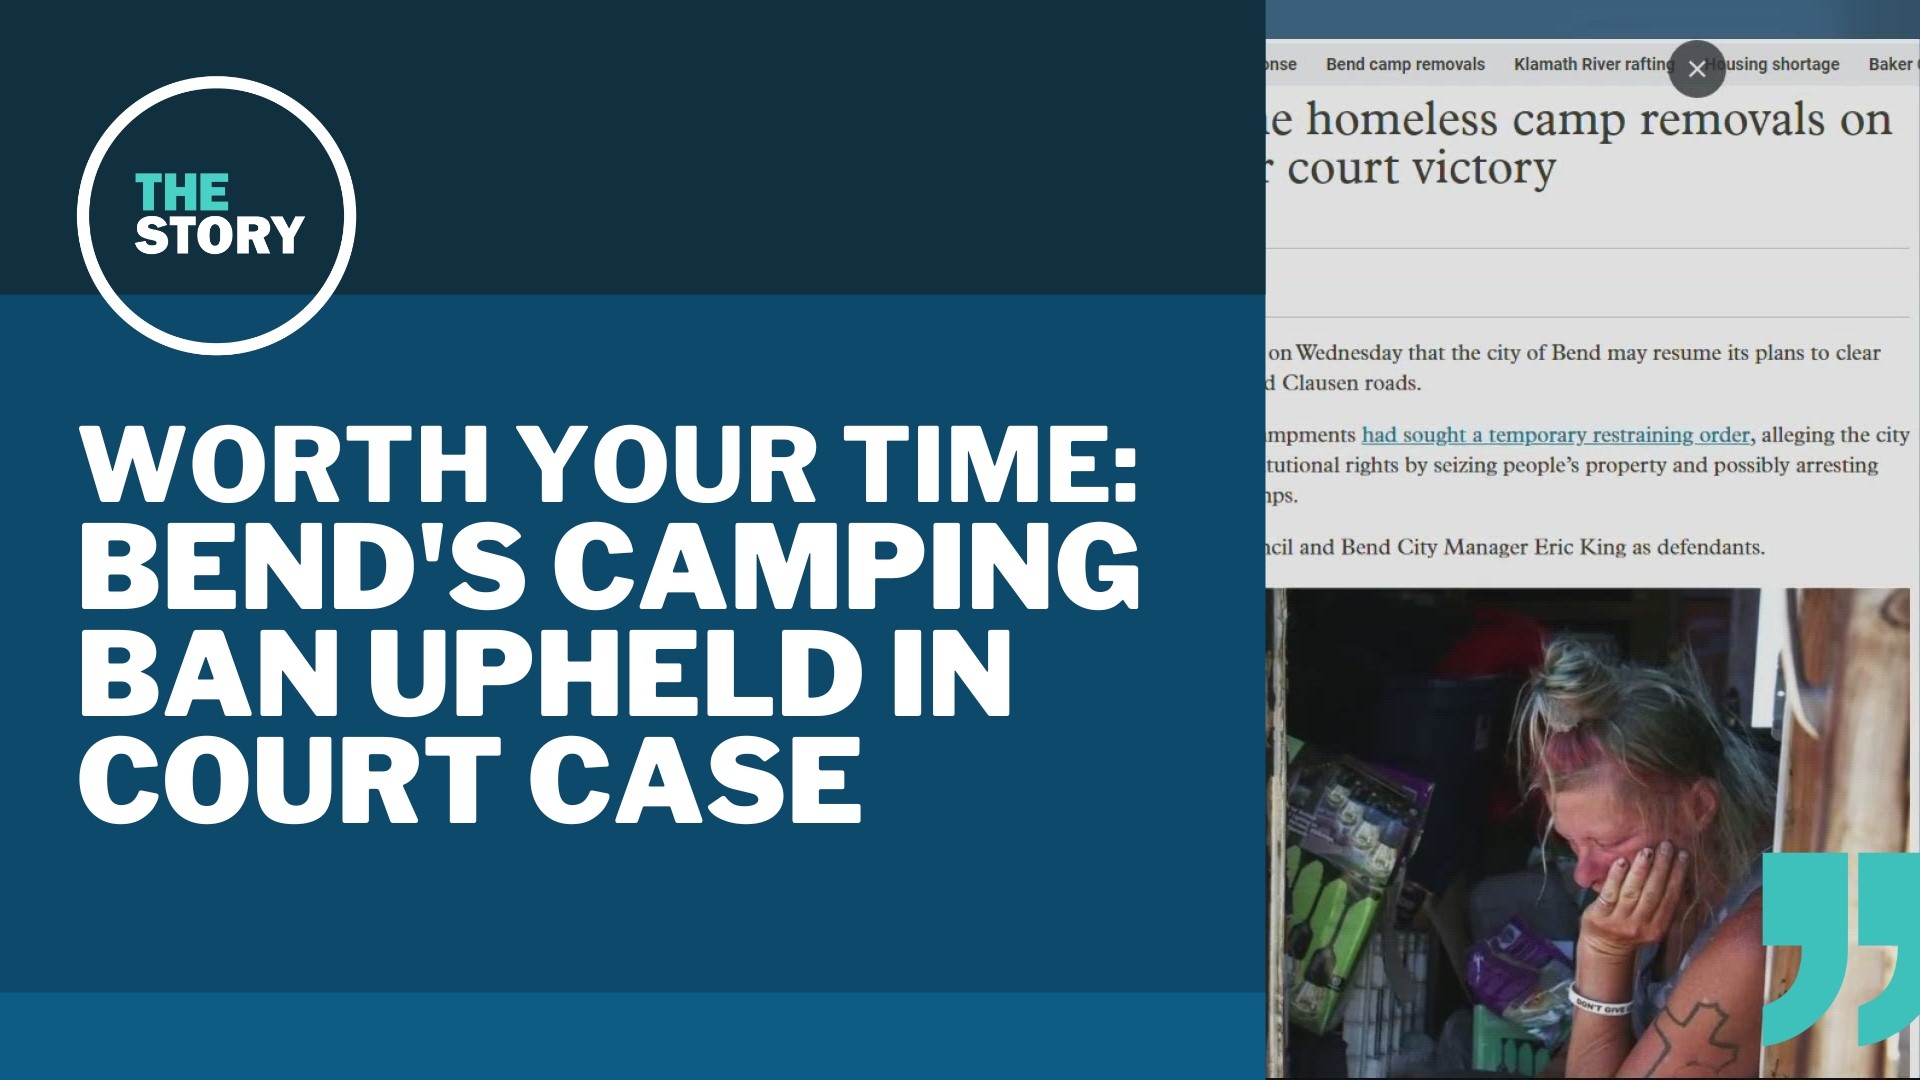 OPB has been covering the case of a homeless camp in Bend where residents have sued the city. A judge ruled that the city's camp cleanups are legal and can resume.